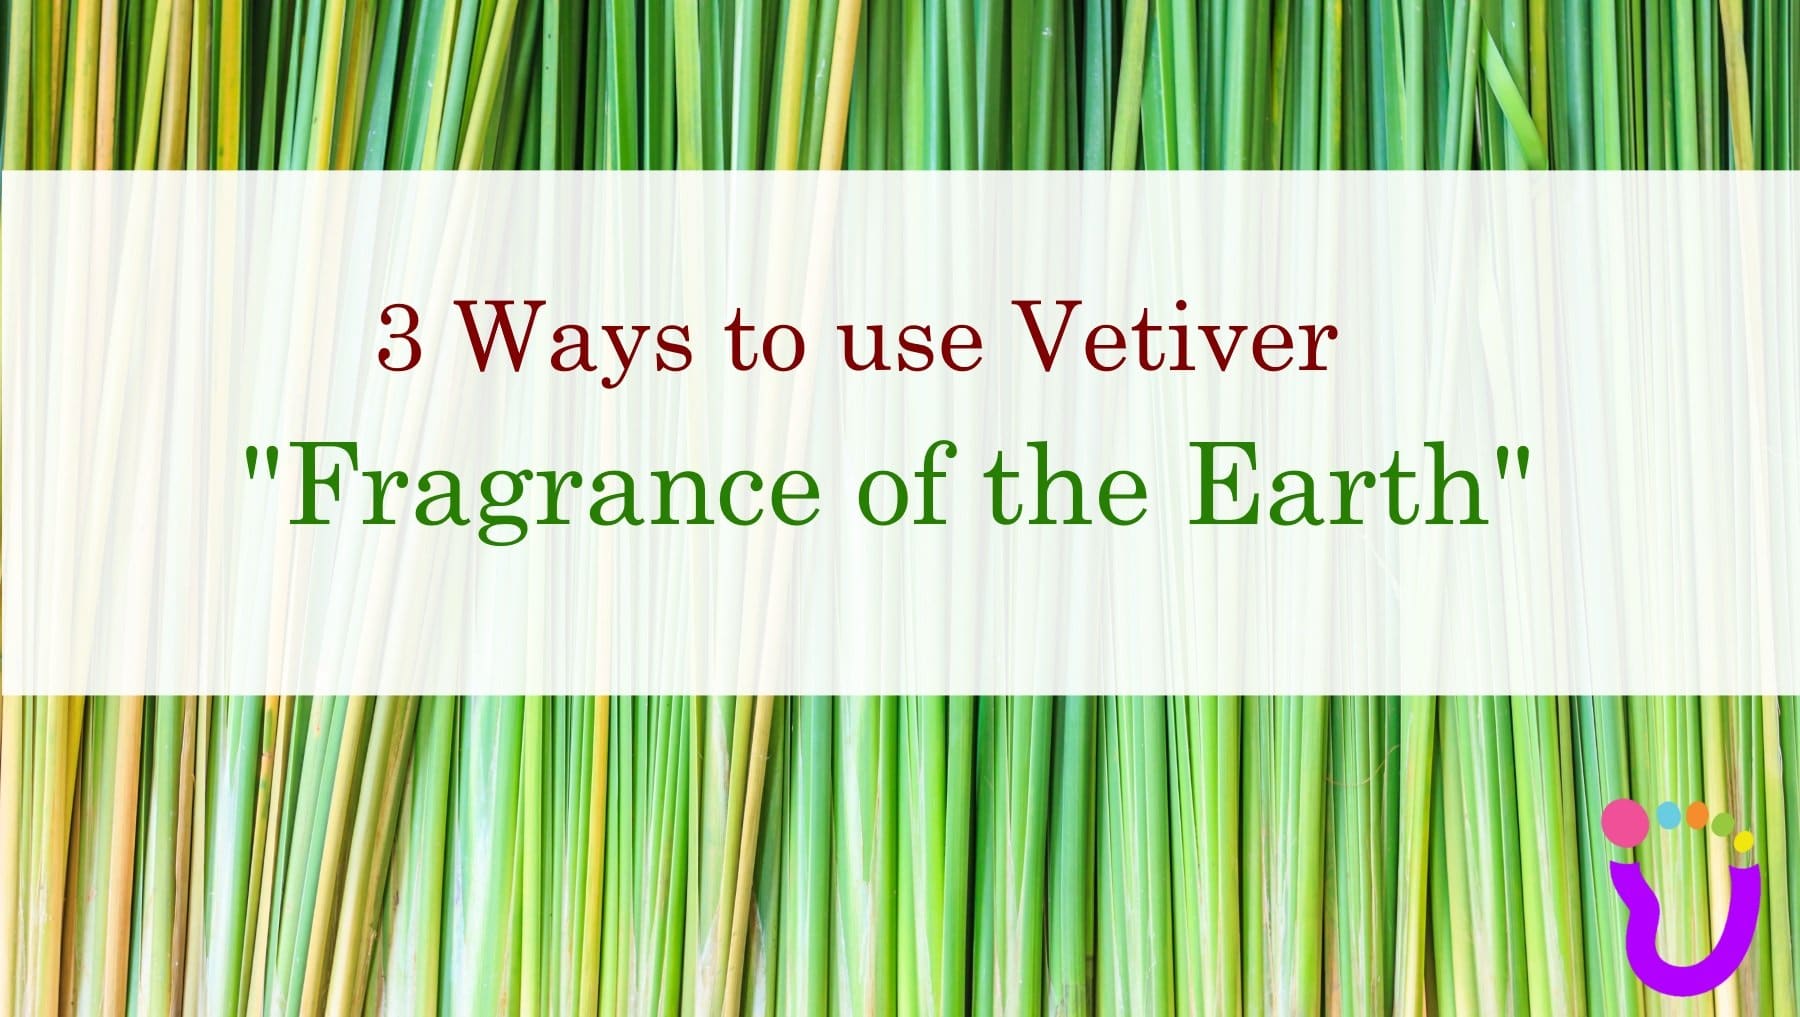 Vetiver Essential Oil Recipes and Health Benefits